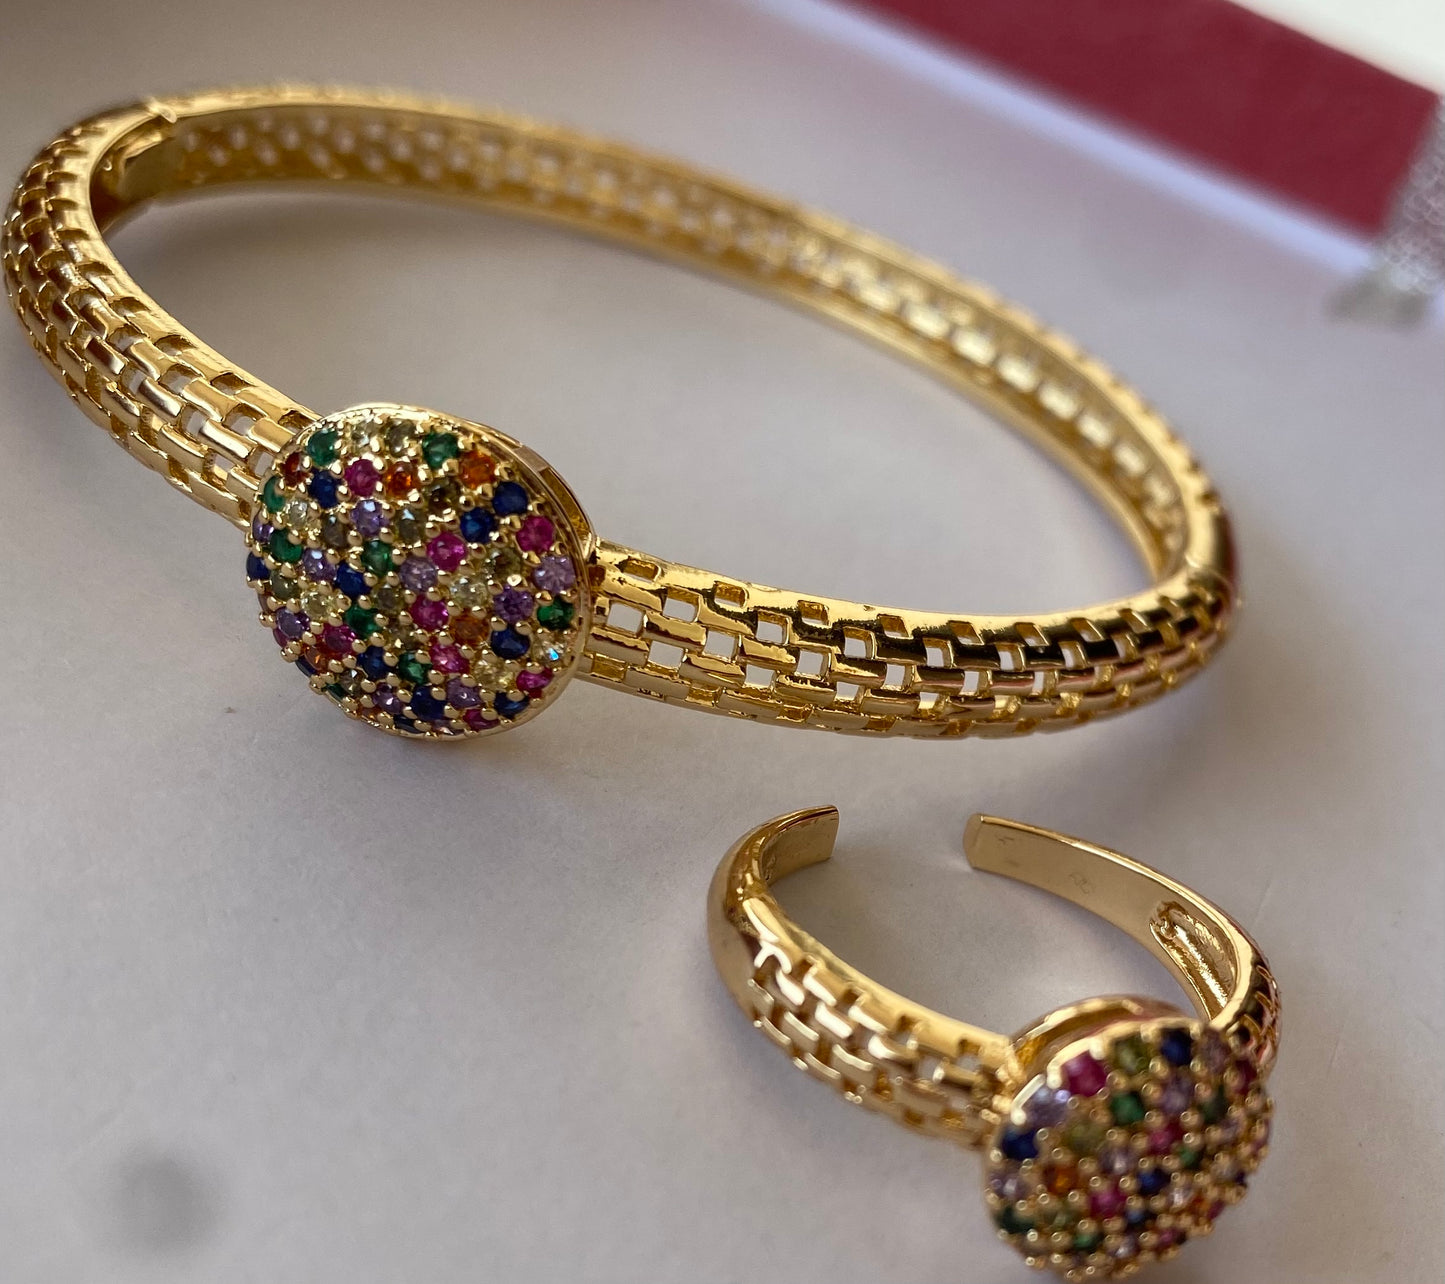 South Indian Ruby Gold Plated Bracelet and Ring SJP